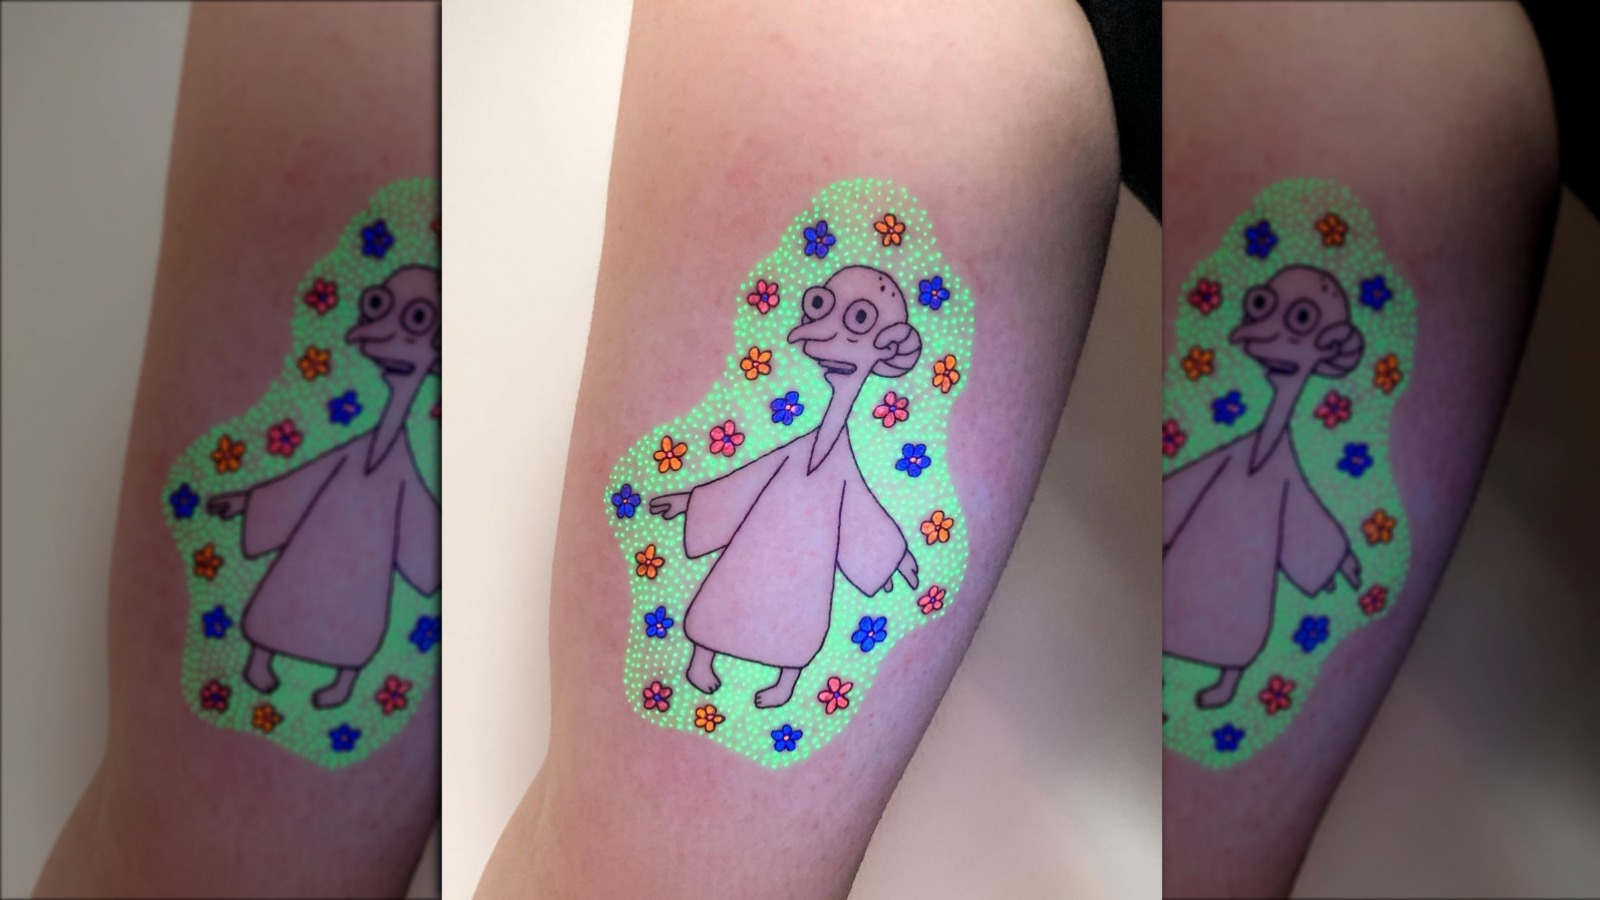 All You Need To Know About Black Light Tattoos, According to Tattoo Artists